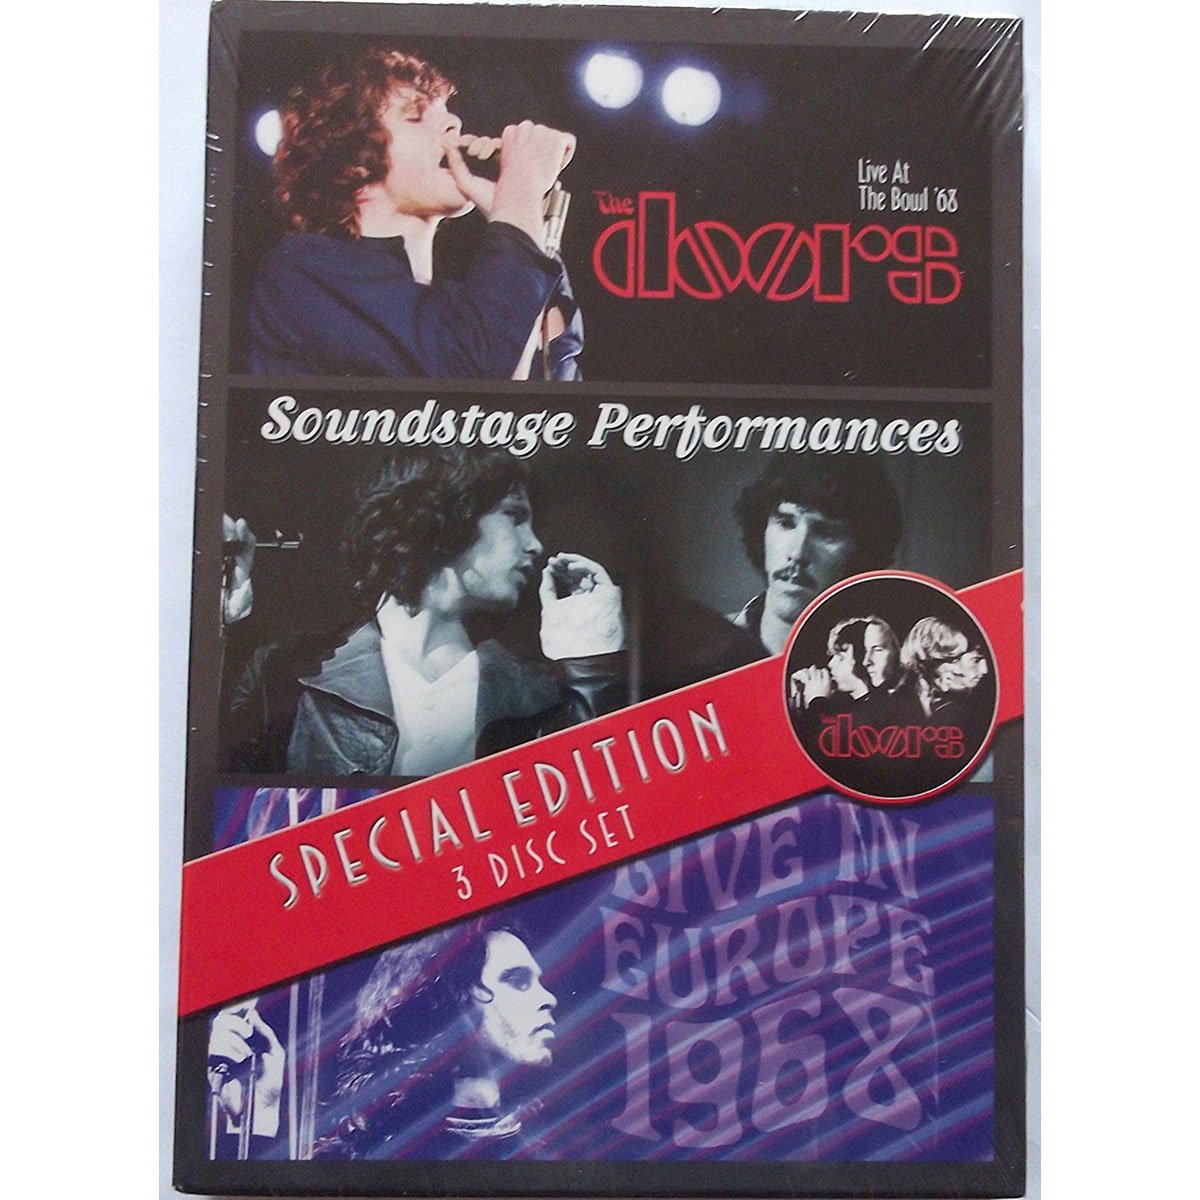 Dvd The Doors The Soundstage Performances